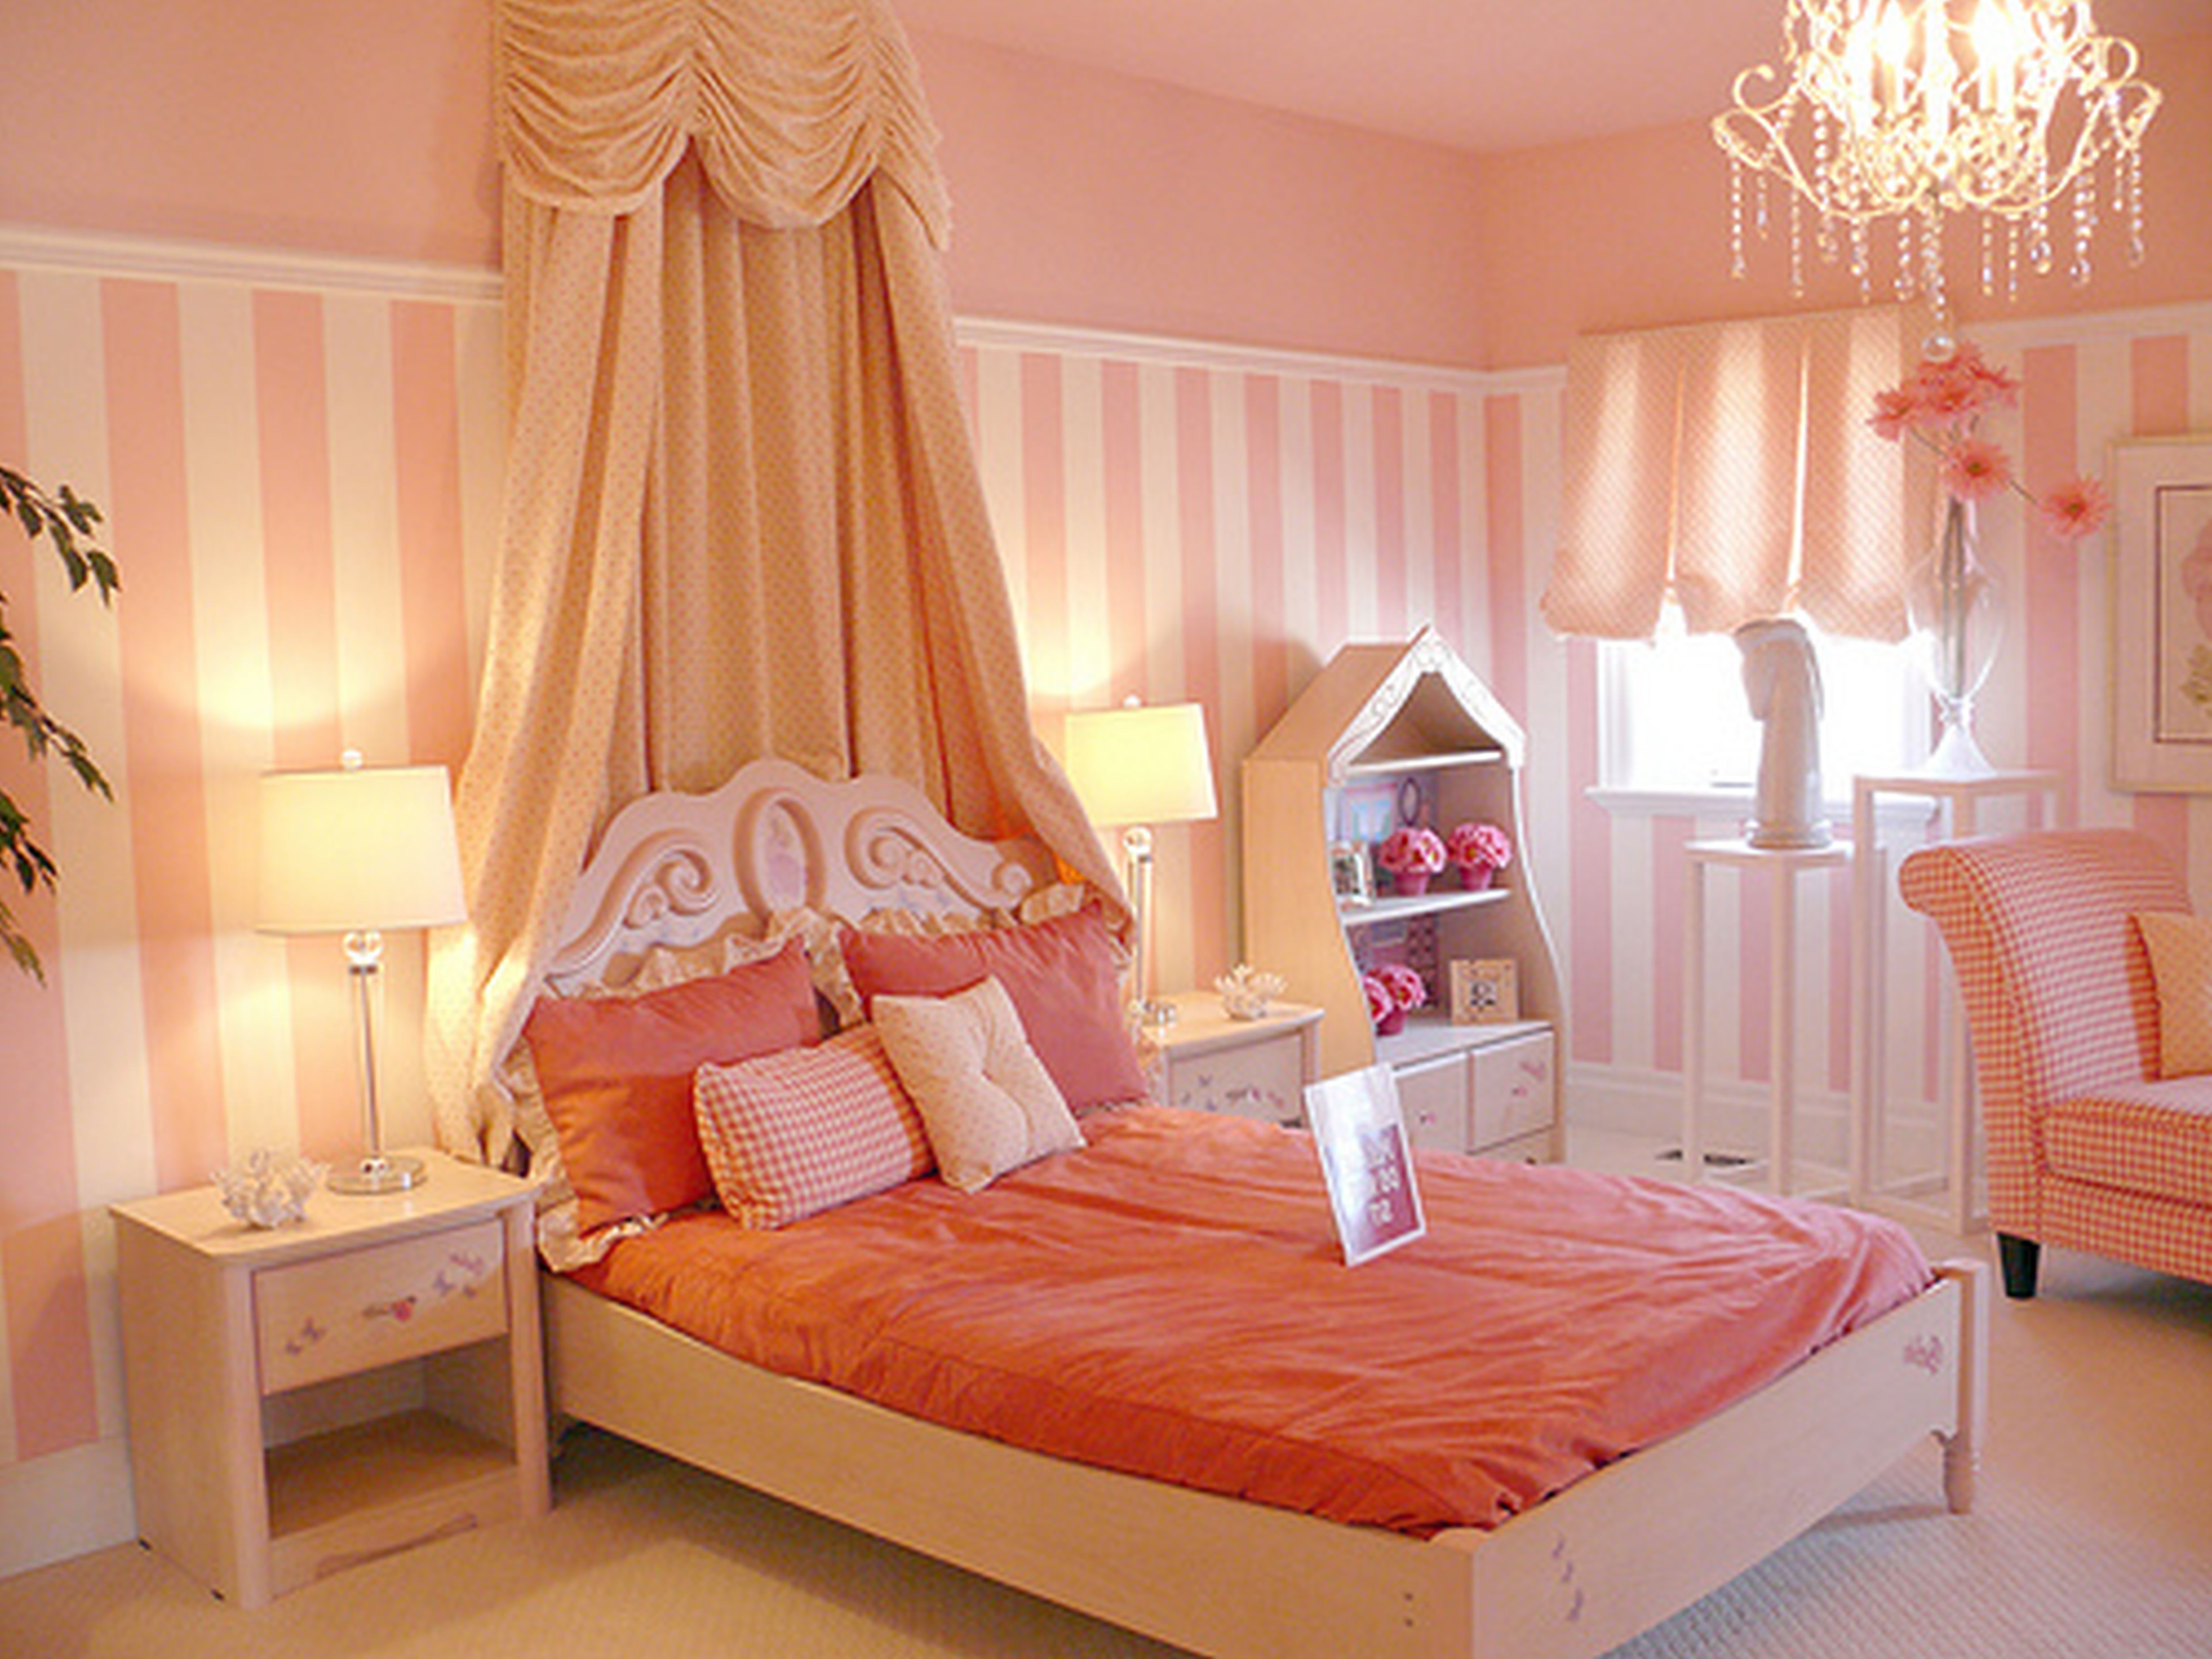 Bedroom Girl Bedroom Ideas Painting Crystal Chandeliers intended for sizing 5000 X 3750